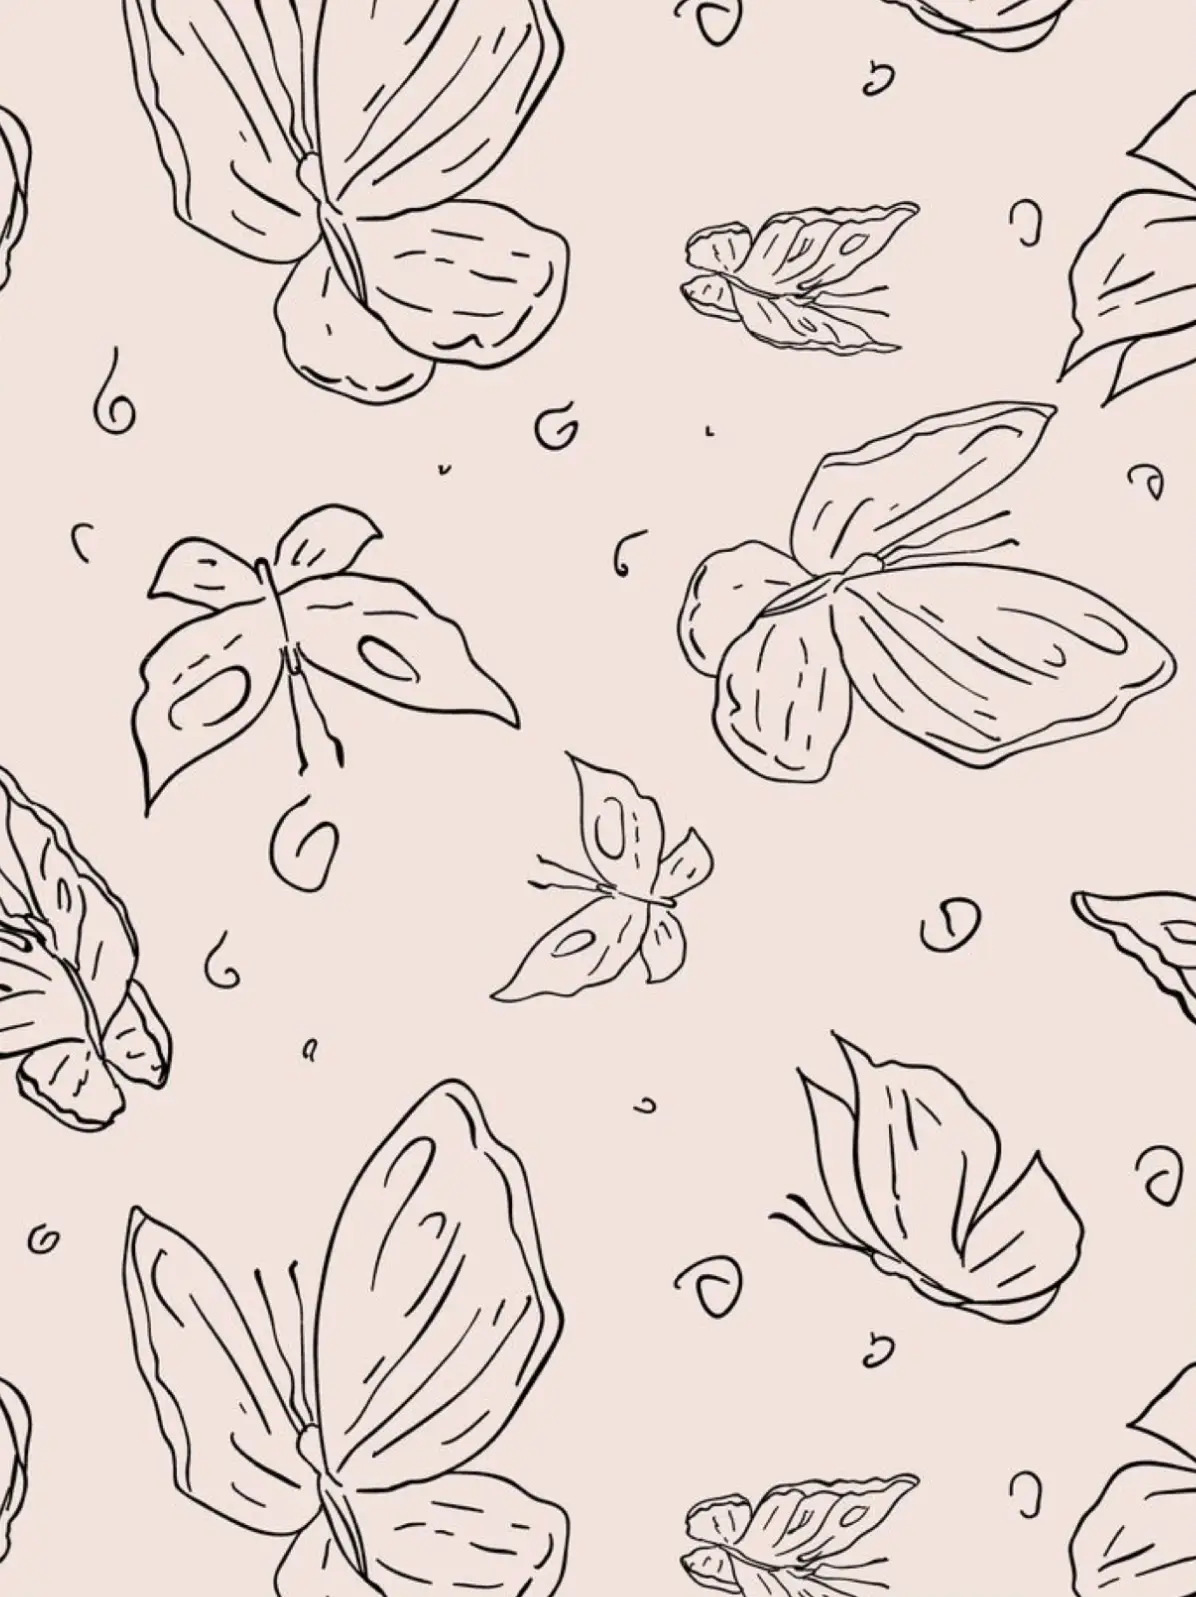  A butterfly pattern with a white background.